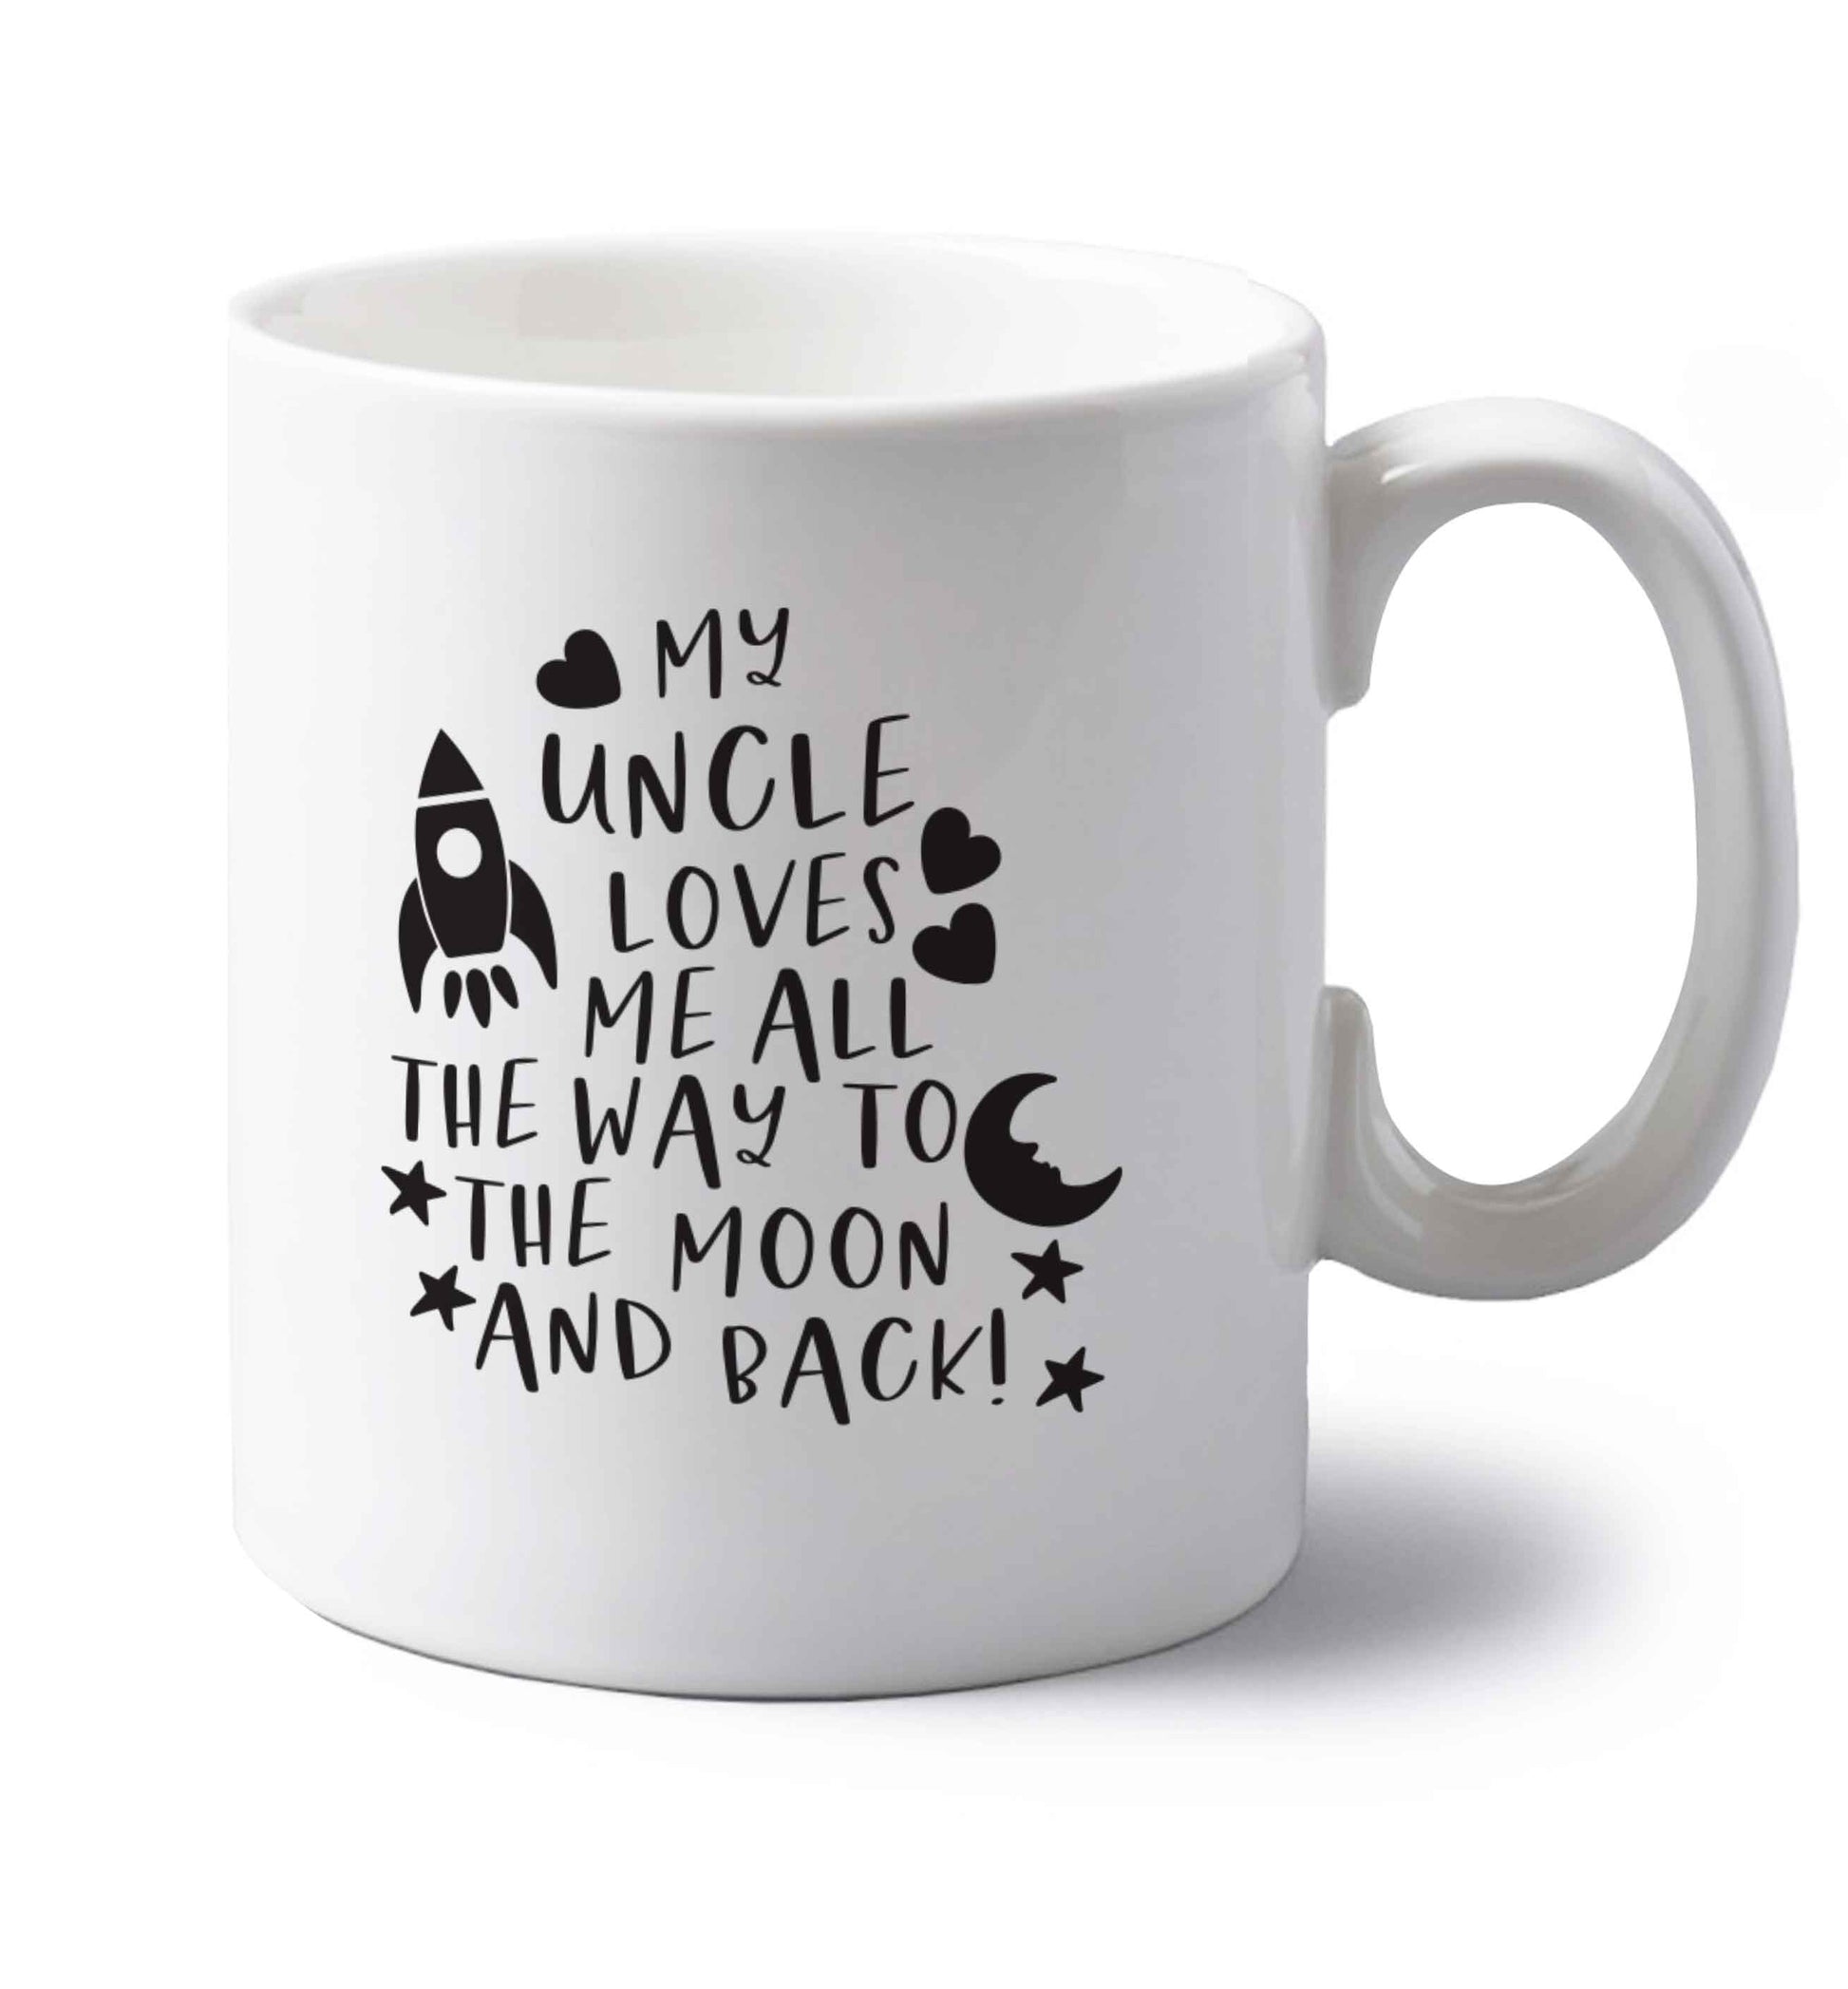 My uncle loves me all the way to the moon and back left handed white ceramic mug 